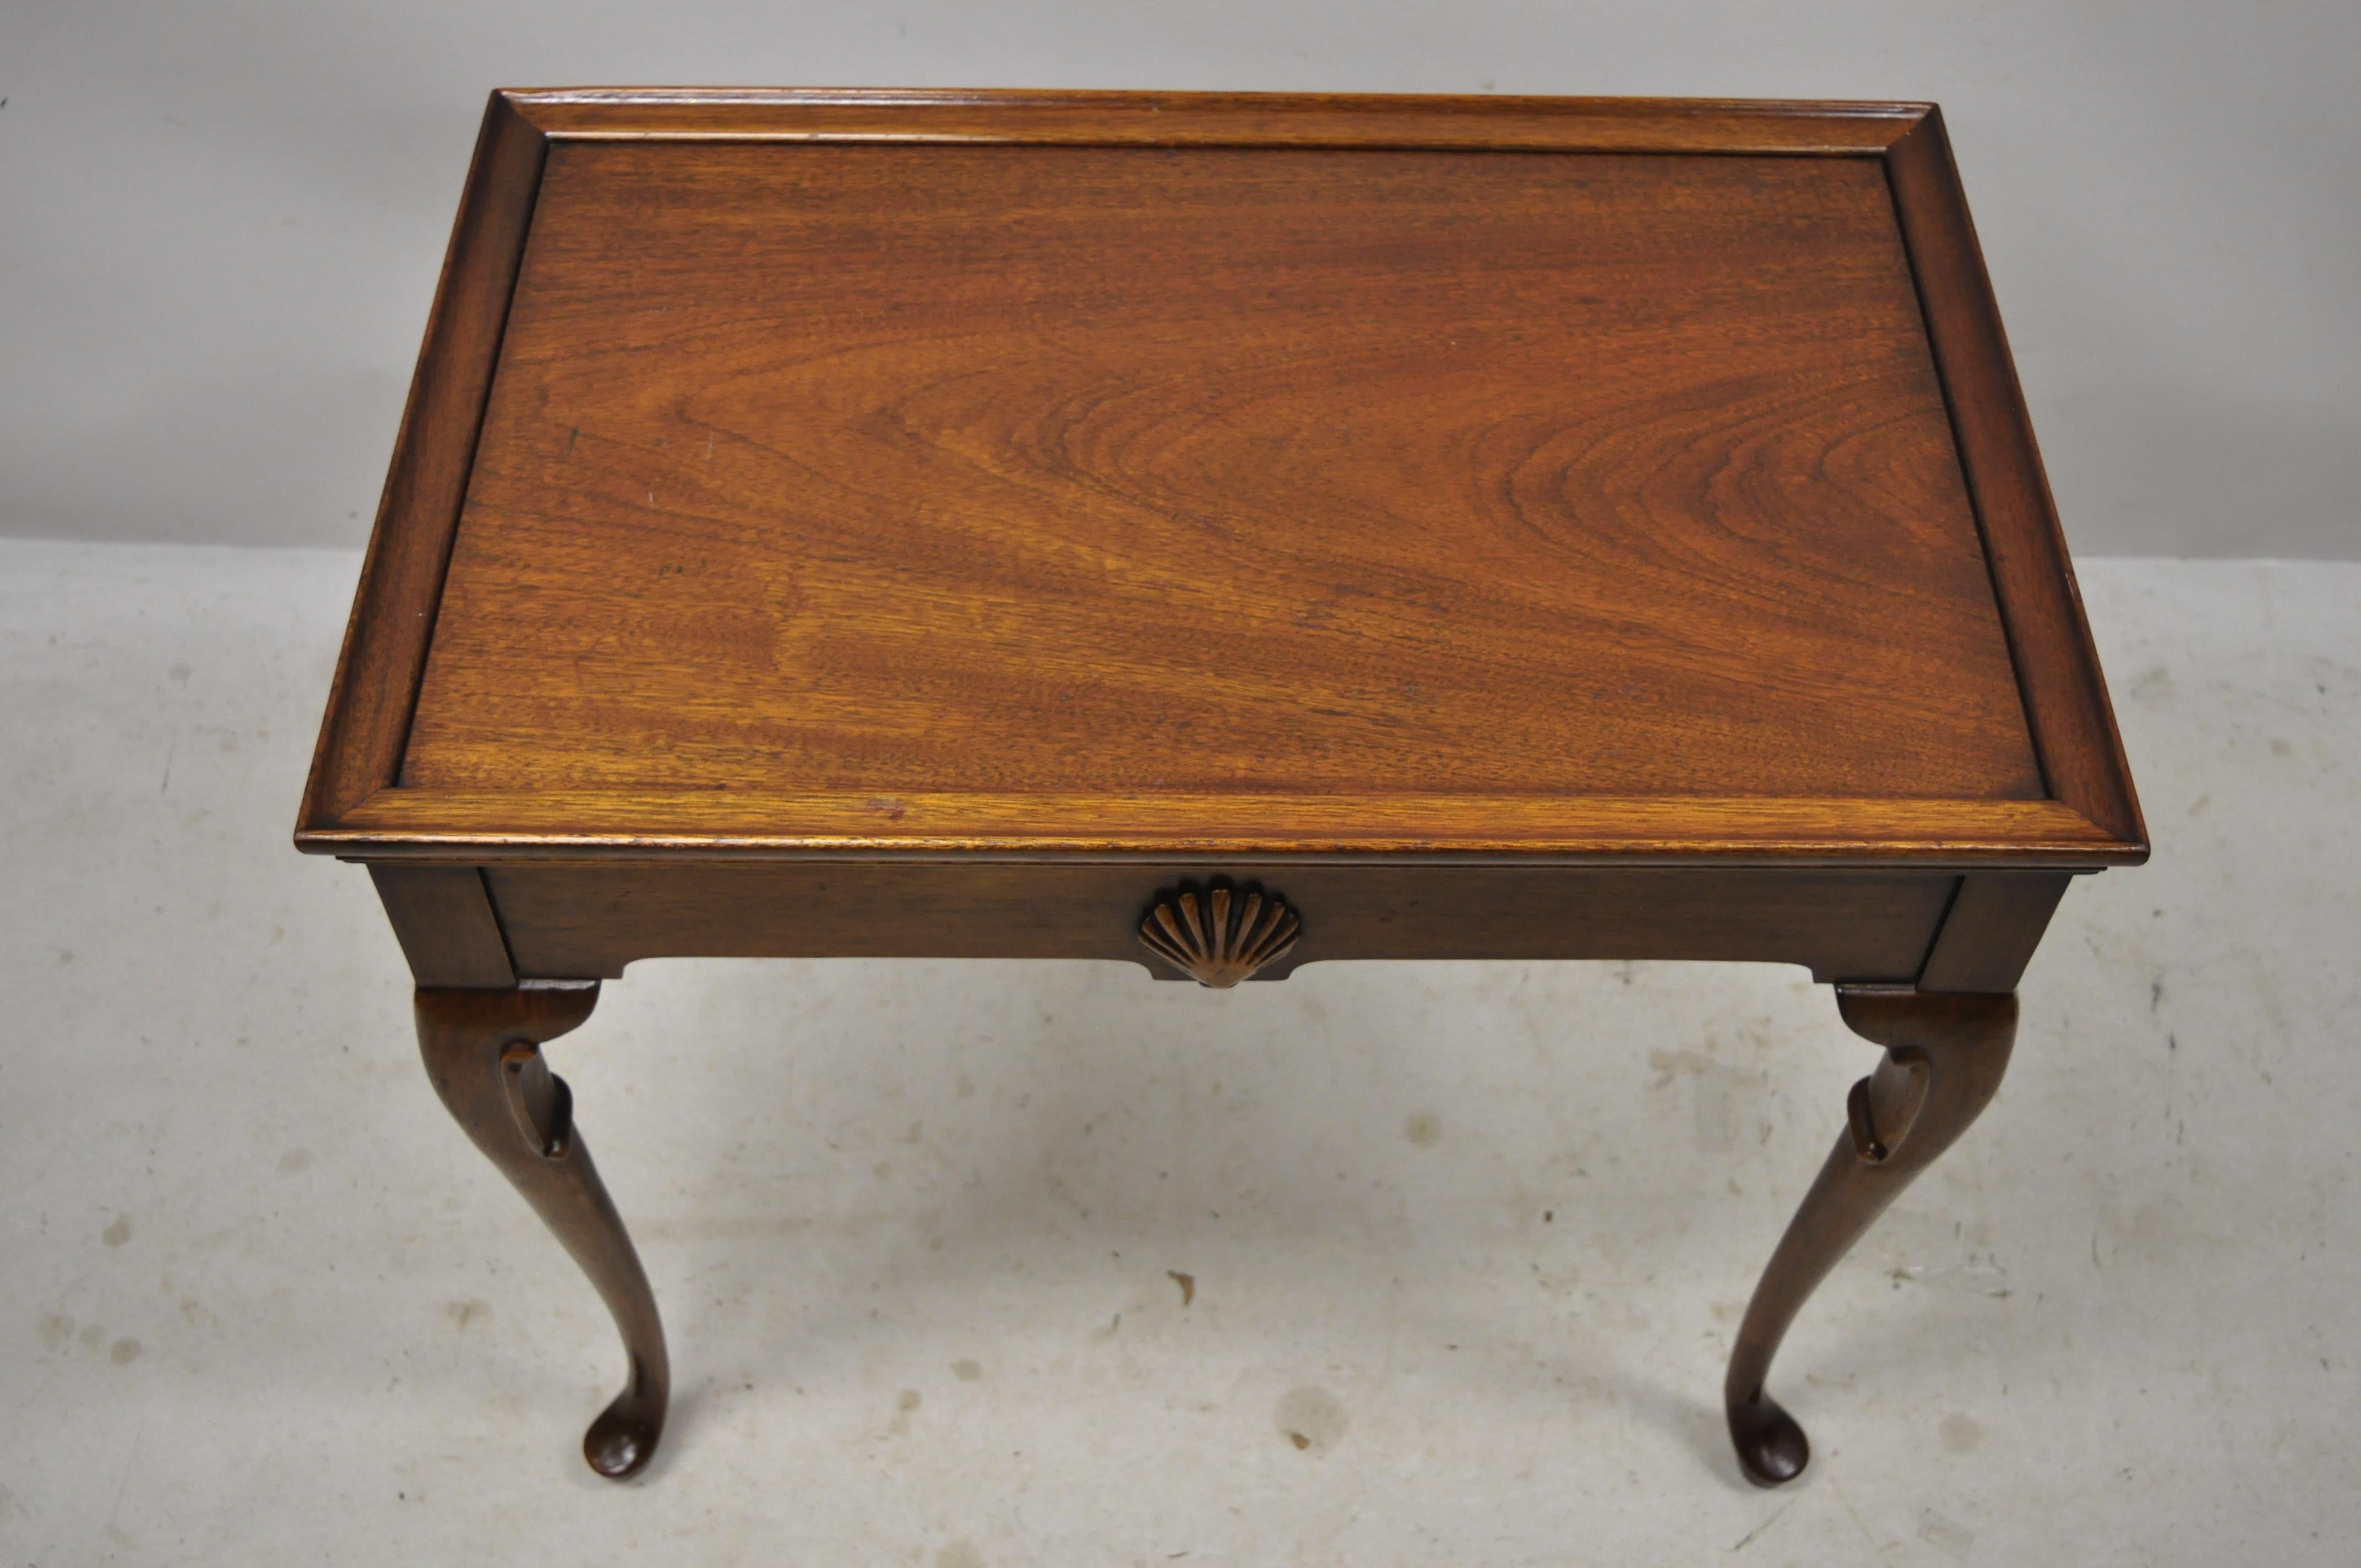 North American Vintage Mahogany Queen Anne Shell Carved Side Tea Table with Pull Out Sides